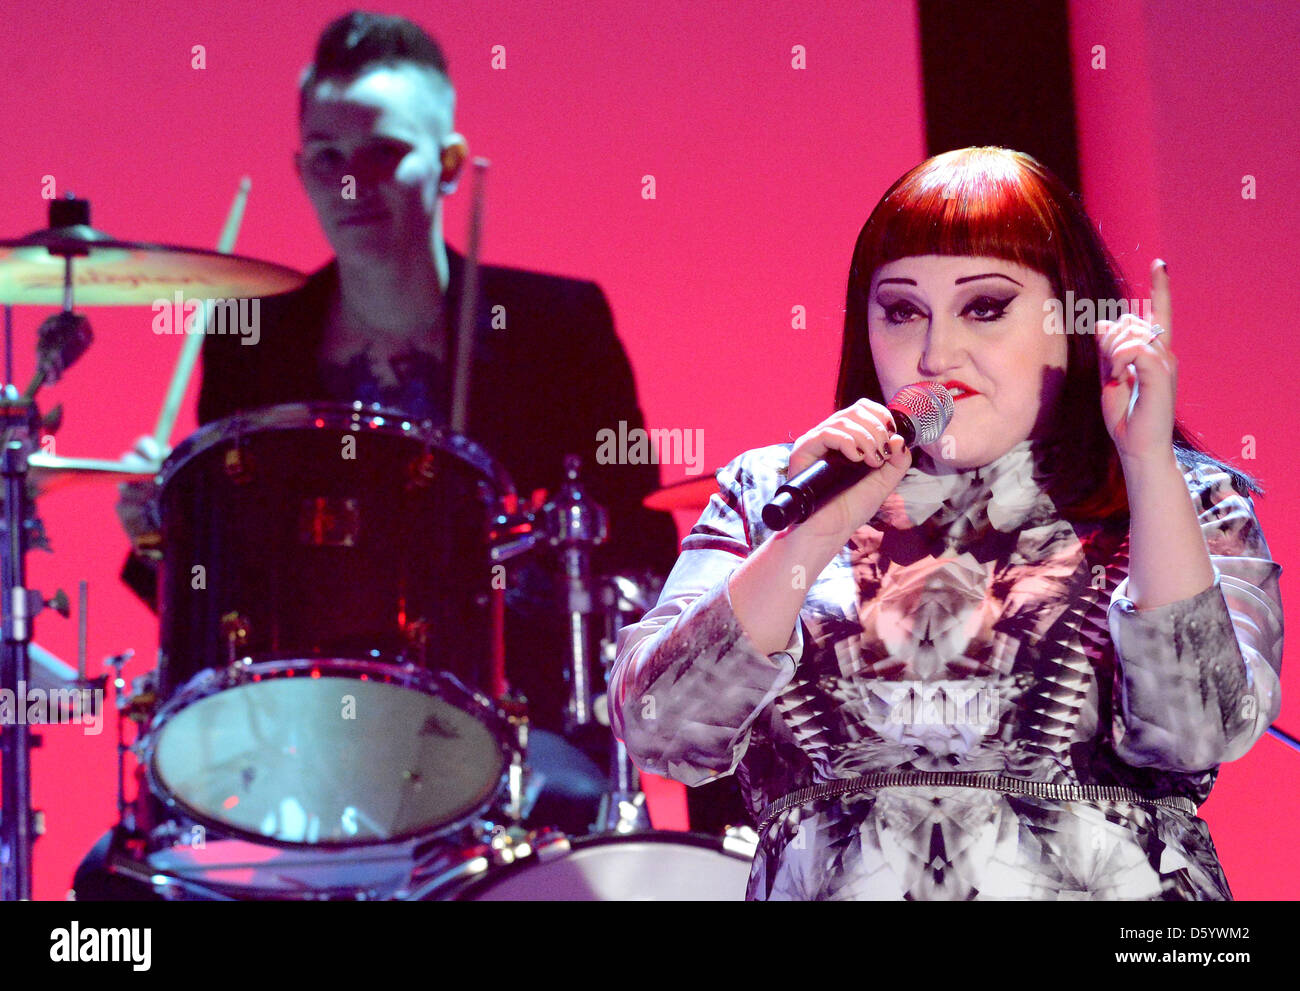 HANDOUT picture shows US singer Beth Ditto performing with her band Gosspi during the German television game show 'Wetten Das...? (Wanna bet...?) at the OVB-Arena in Bremen, Germany 3 November 2012. Photo:  Sascha Baumann/ZDF/dpa   (CE:  Sascha Baumann/ZD Stock Photo